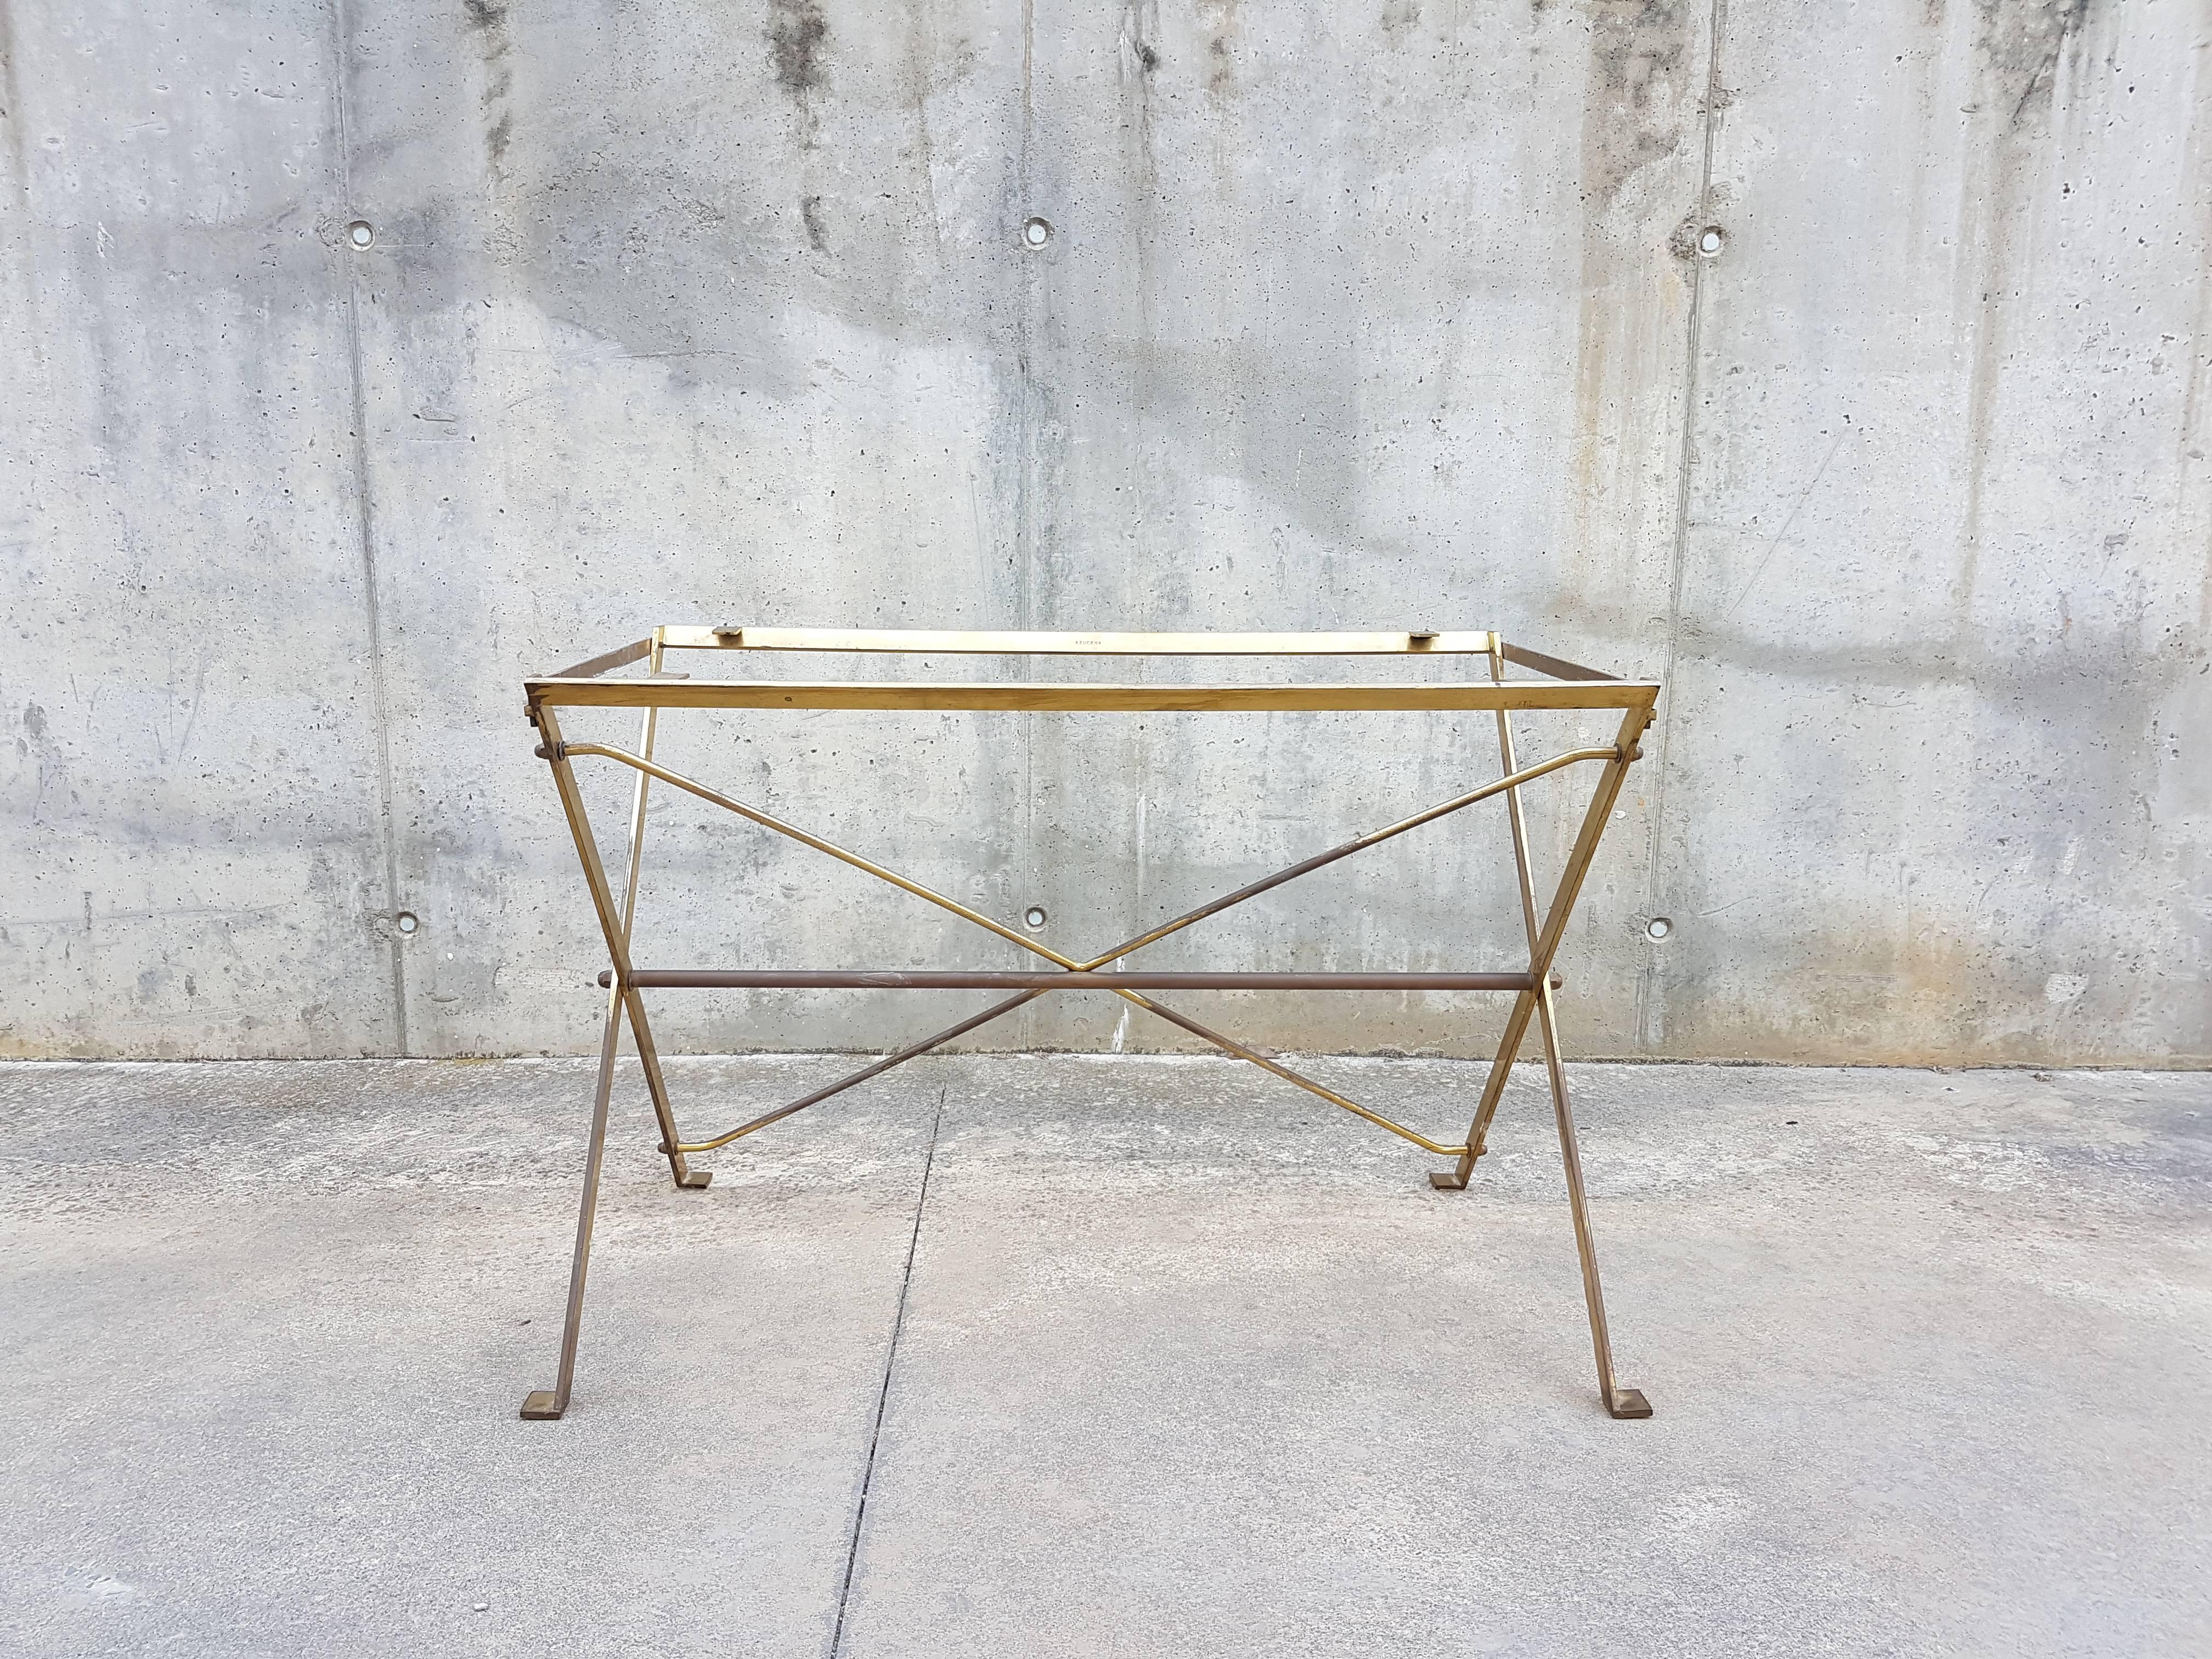 Mid-20th Century Vintage Wood and Brass T3 Cavalletto Table by Caccia Dominioni for Azucena 1950s For Sale